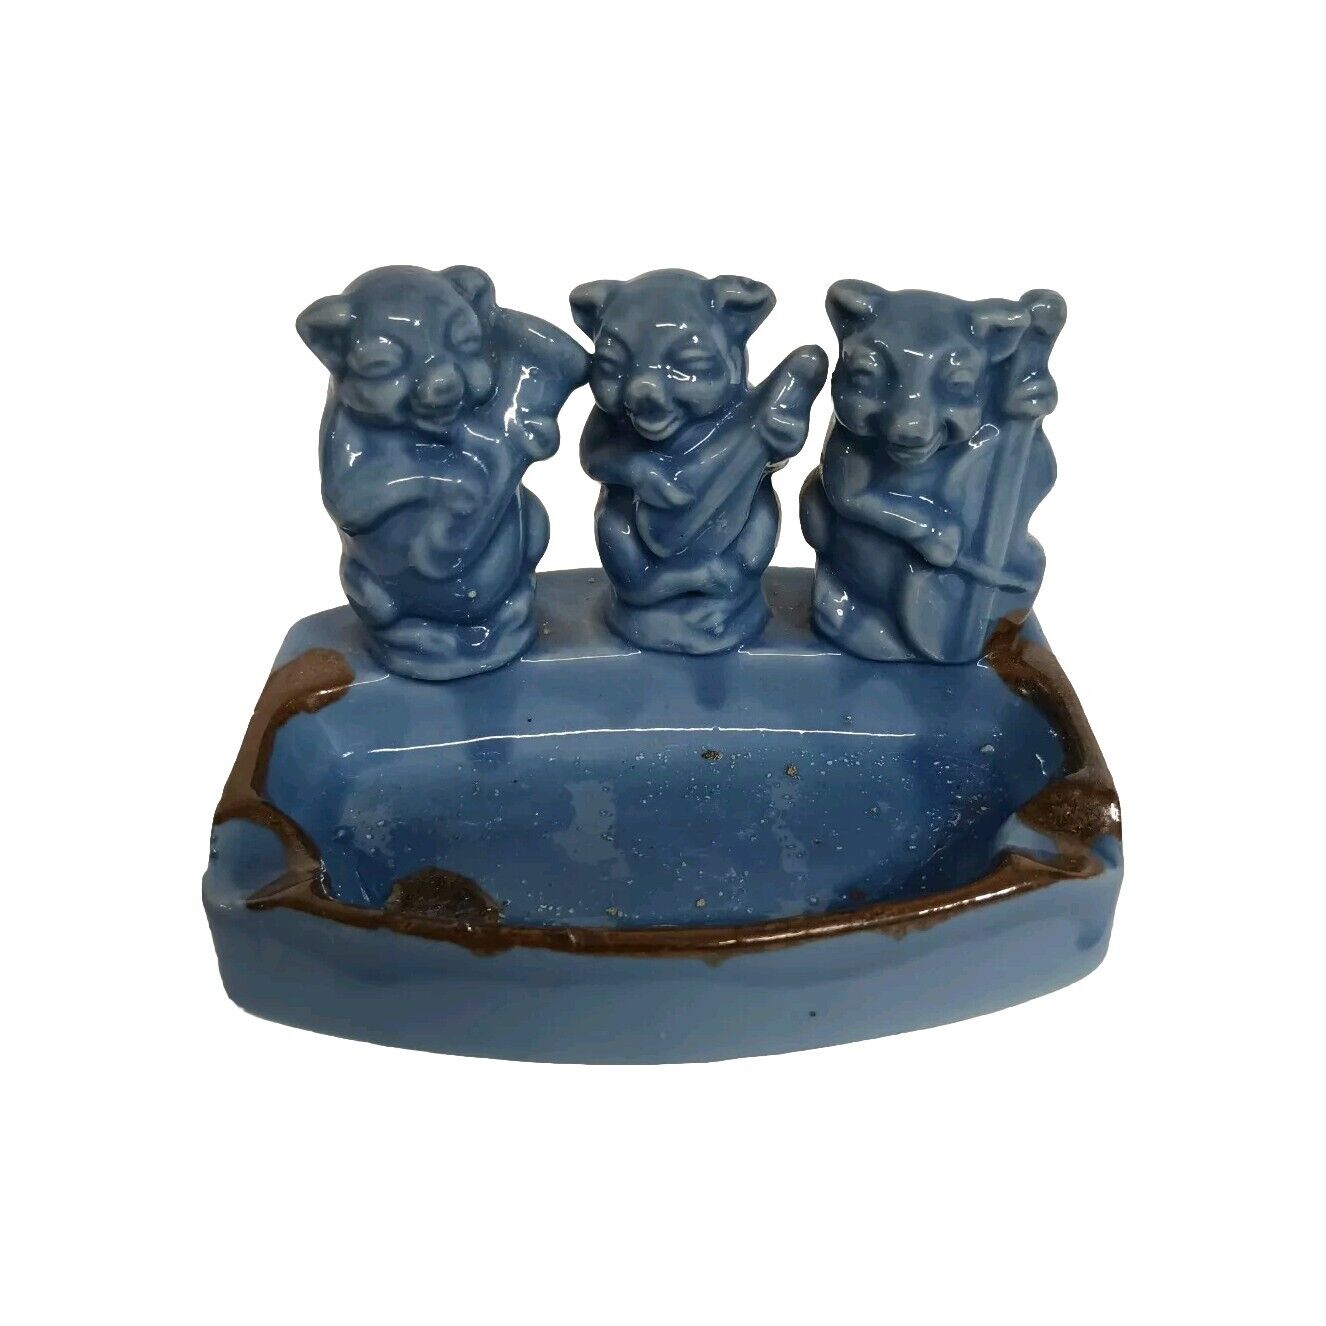 VINTAGE BLUE CERAMIC ASHTRAY 3 LITTLE PIGS WITH MUSICAL INSTRUMENTS JAPAN